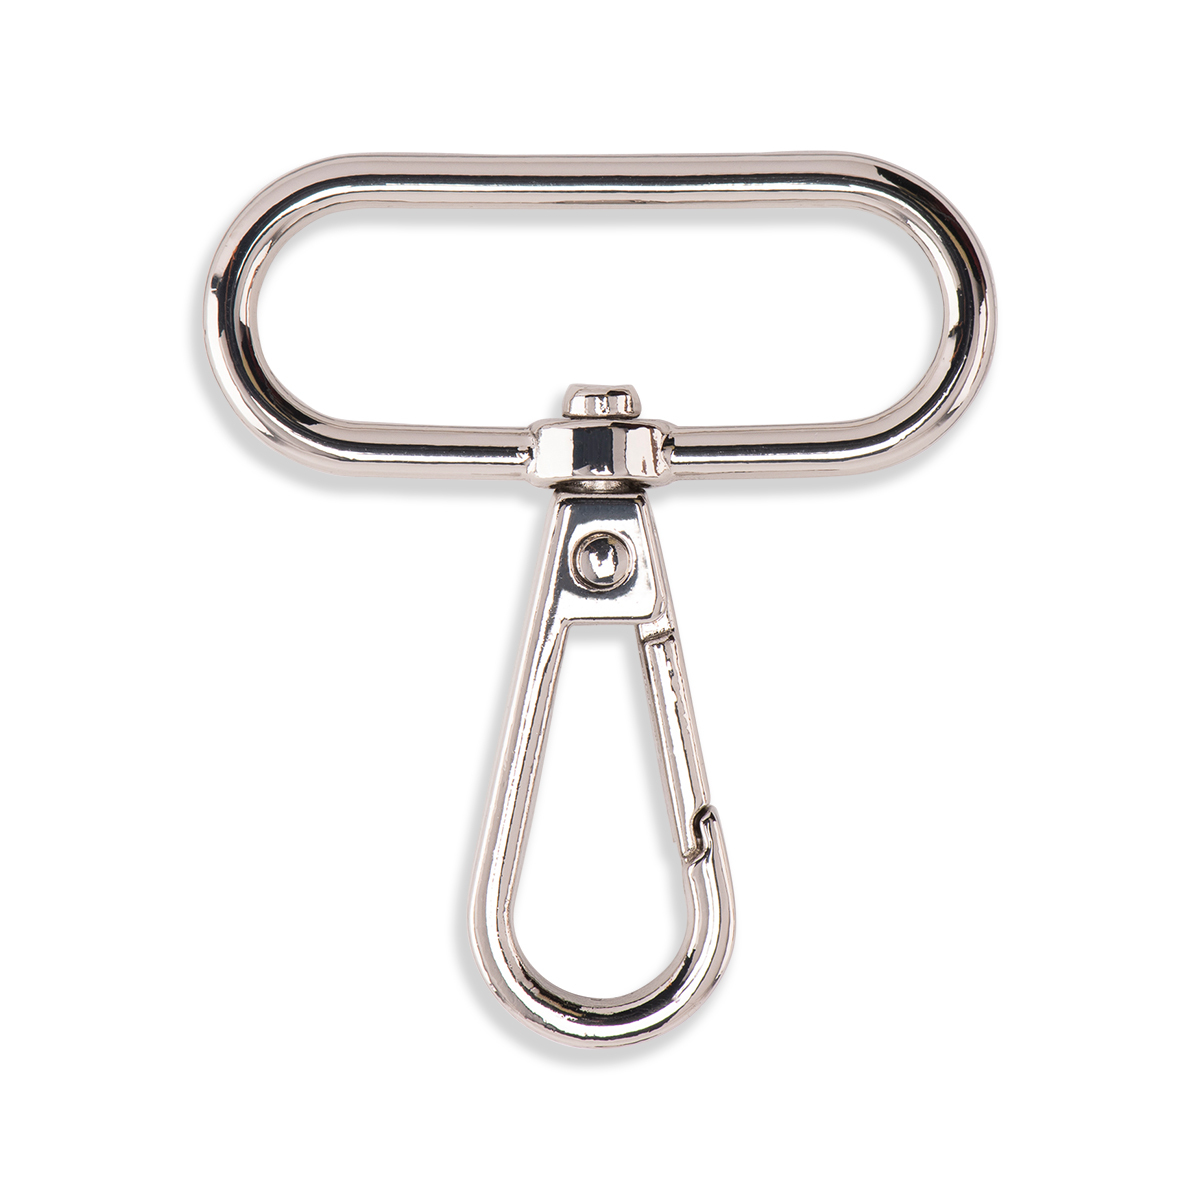 Swivel Clips - 1/2 Inch - 13mm - Swivel Hooks - Lobster Clasp - Bag  Hardware - Strap Hooks - Strap Clips - 2 Minutes 2 Stitch